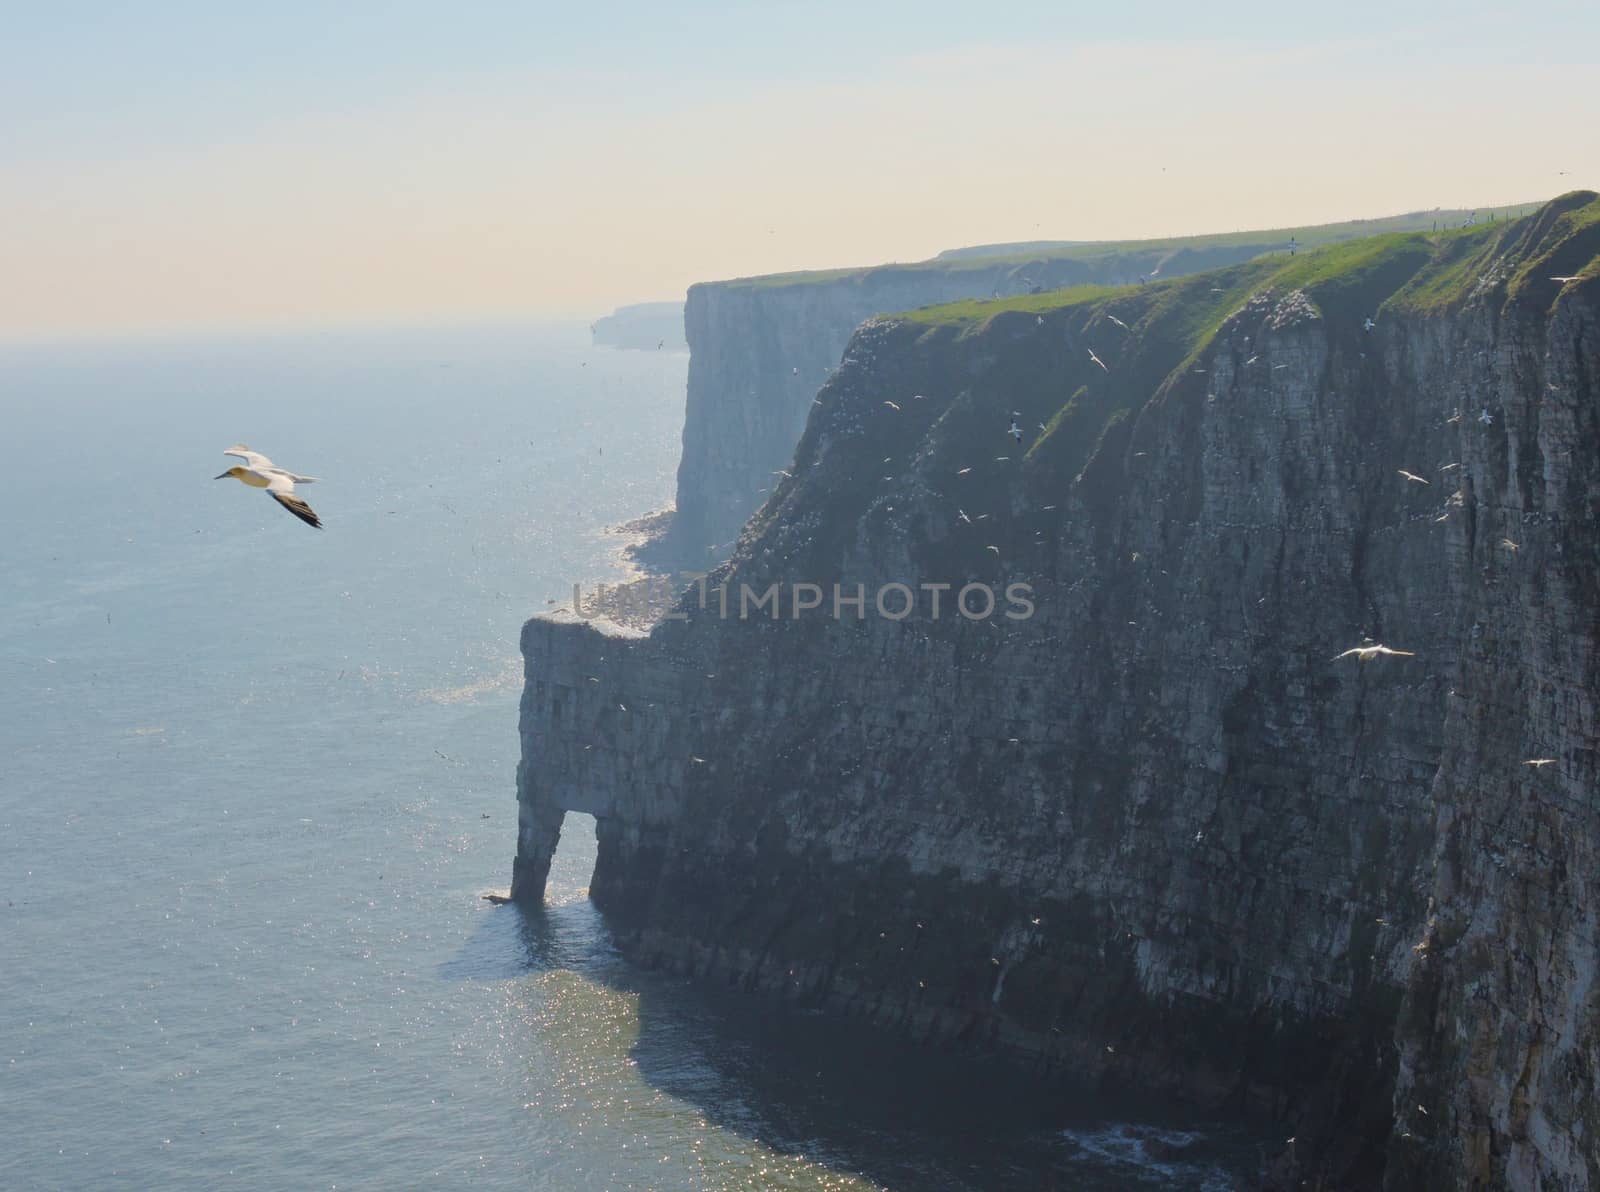 An image of Bempton Cliffs, a nature reserve on the beautiful Yorkshire coast.